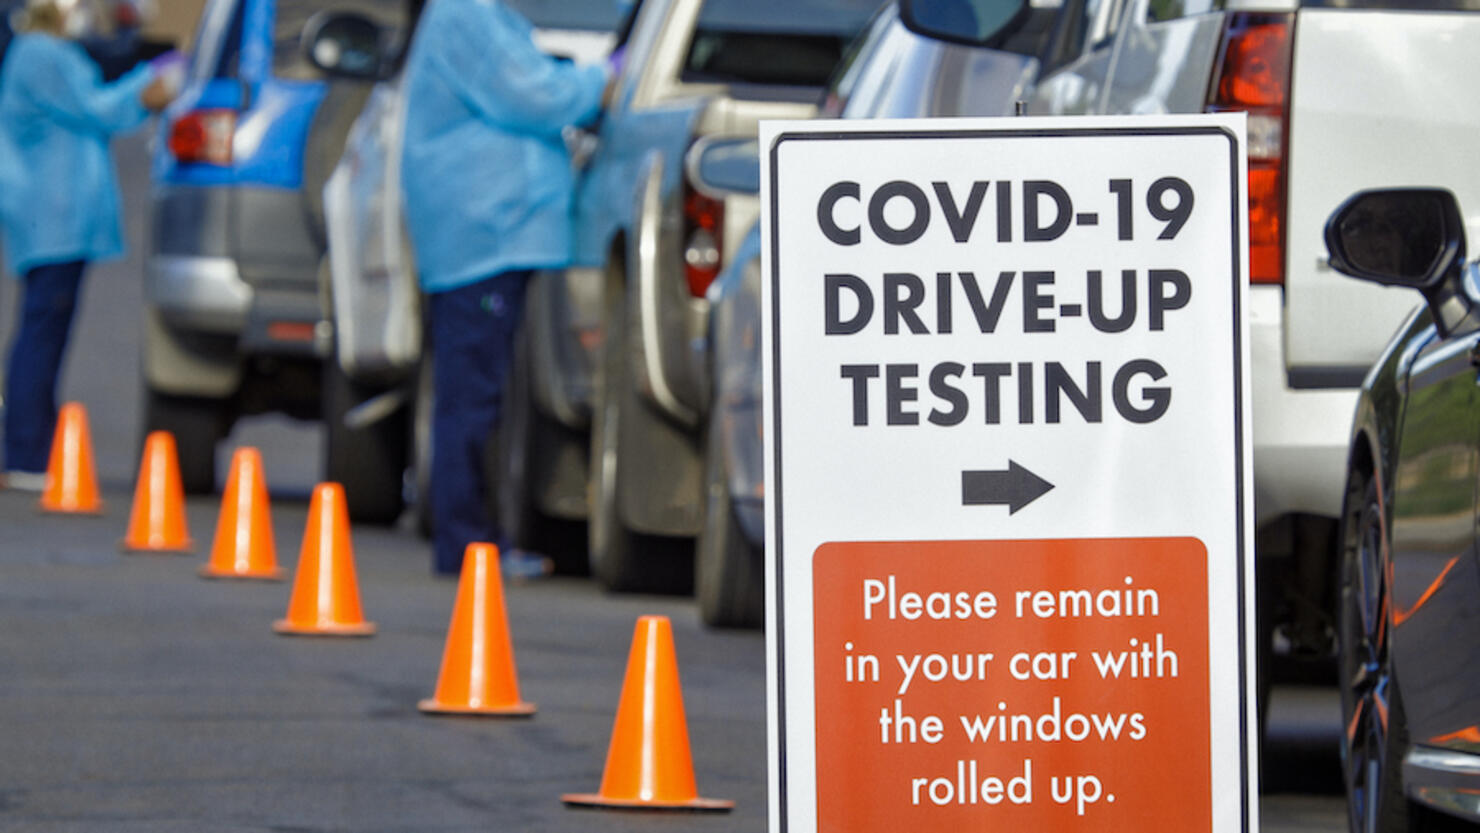 A "COVID-19 Drive-Up Testing" Sign Sits in the Foreground While Two Female Nurses Wearing Gowns and Surgical Face Masks Talk to Patients in their Cars in a Drive-Up (Drive Through) COVID-19 (Coronavirus) Testing Line Outside a Medical Clinic/Hospital Outd